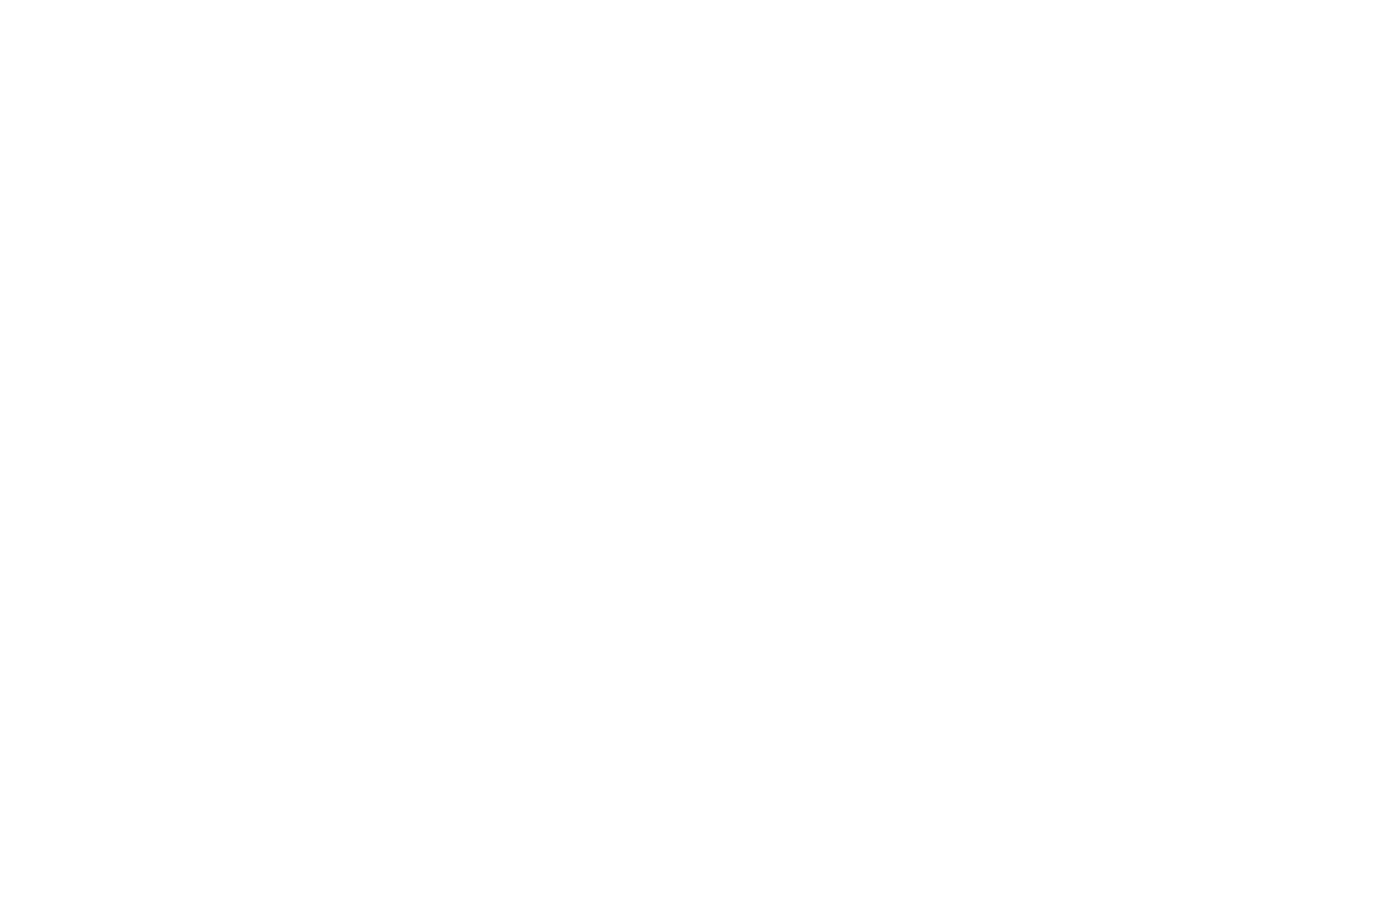 Ernie Pyle: Life In The Trenches